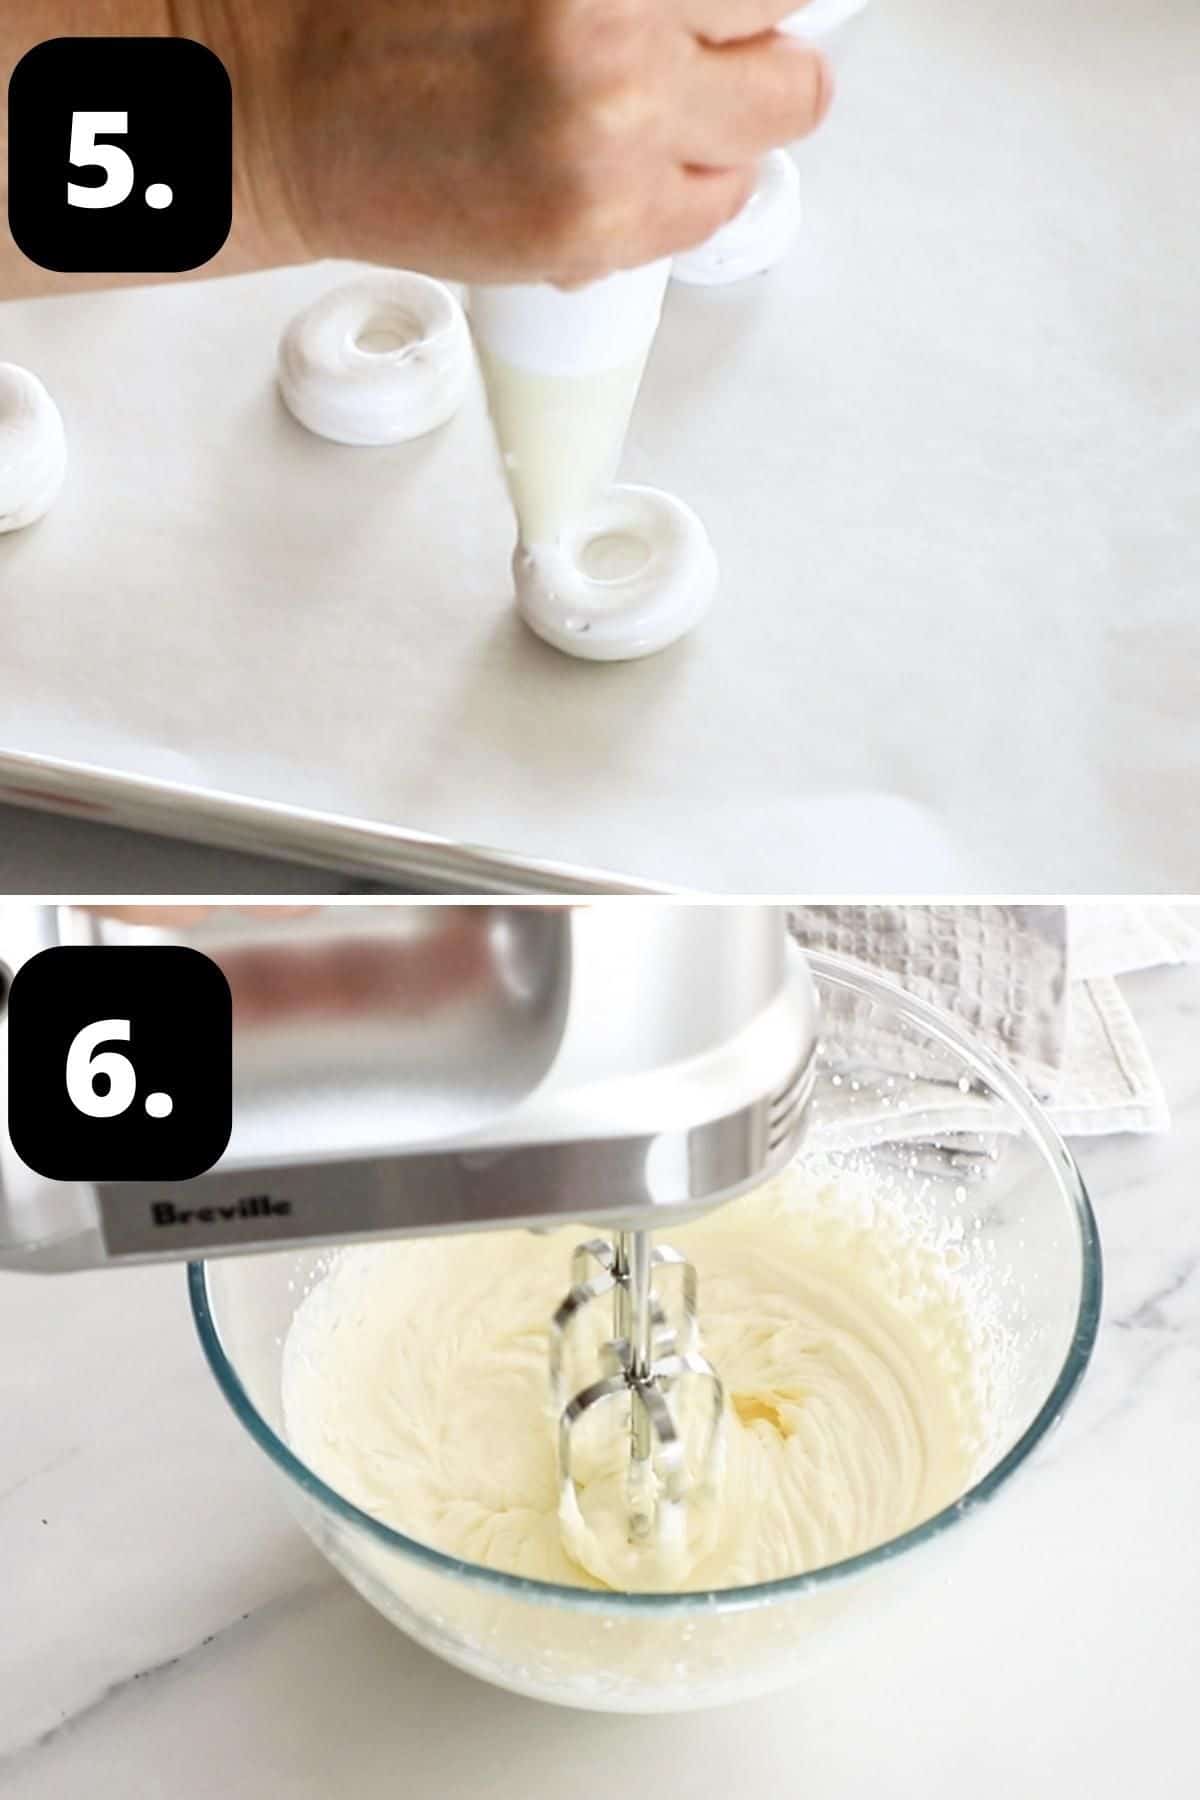 Steps 5-6 of preparing this recipe - piping the meringue nests and beating the cream for the filling.